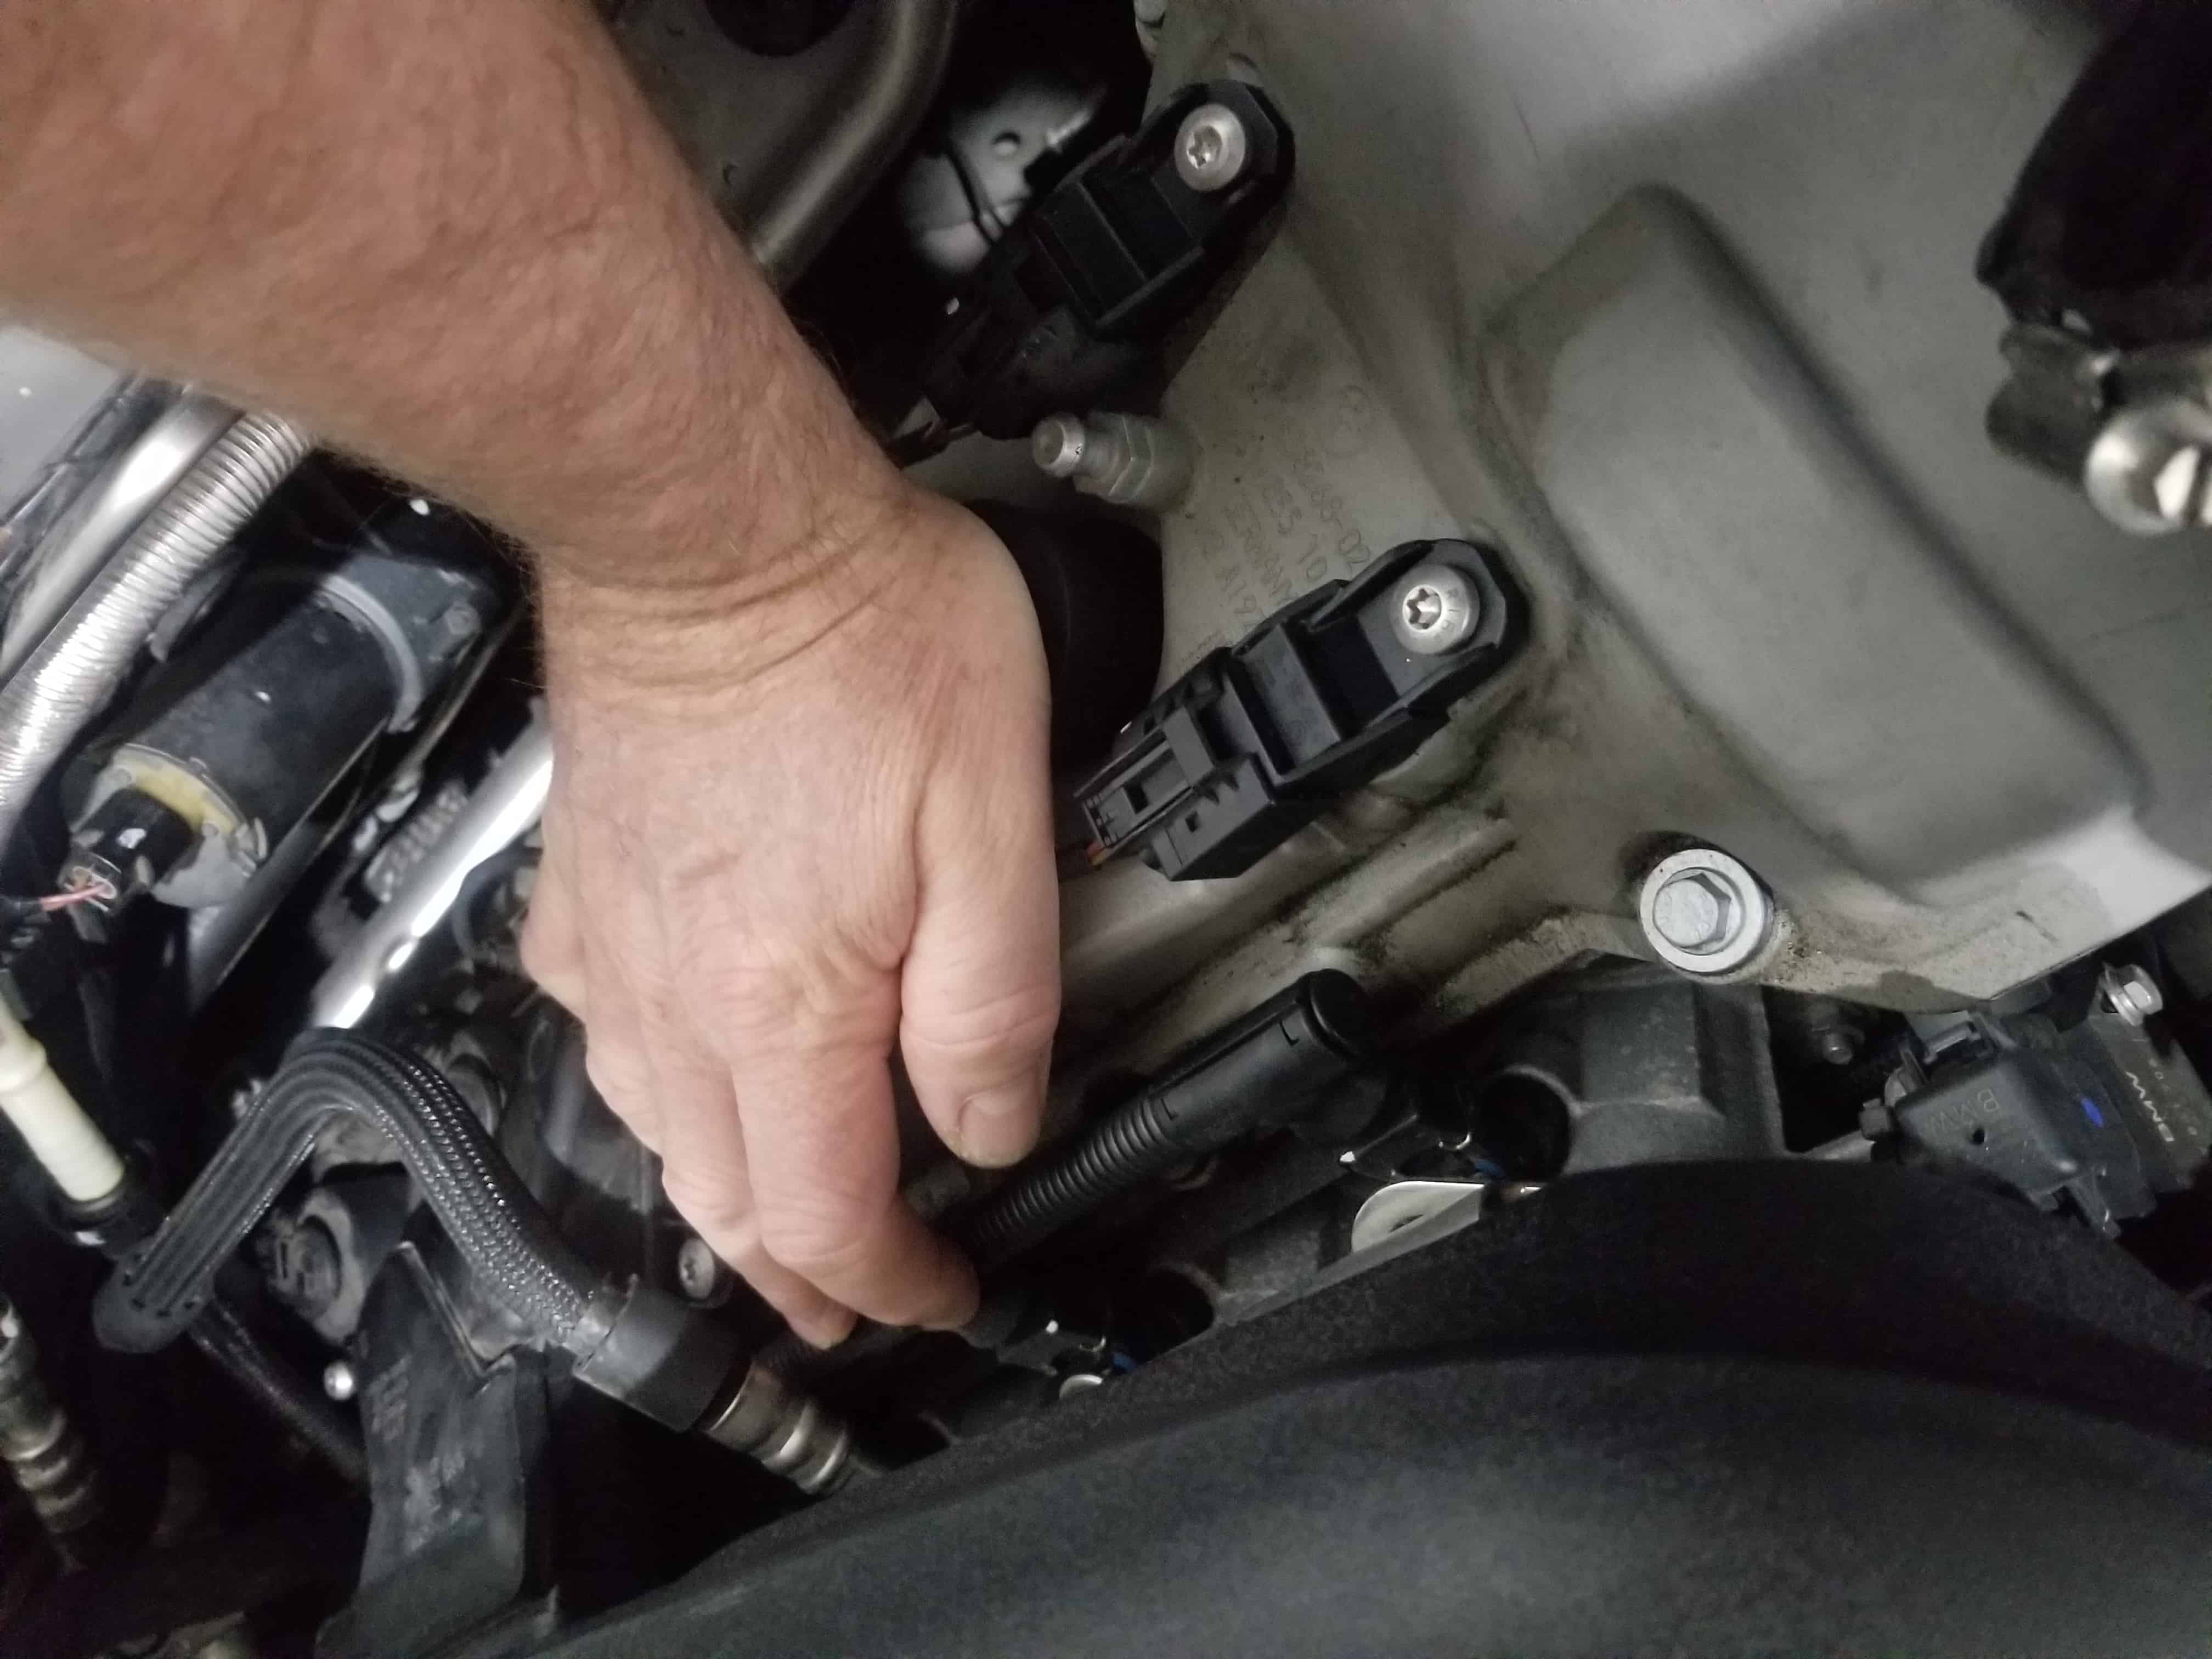 BMW E90 M3 tune up - install ignition coil with palm of hand